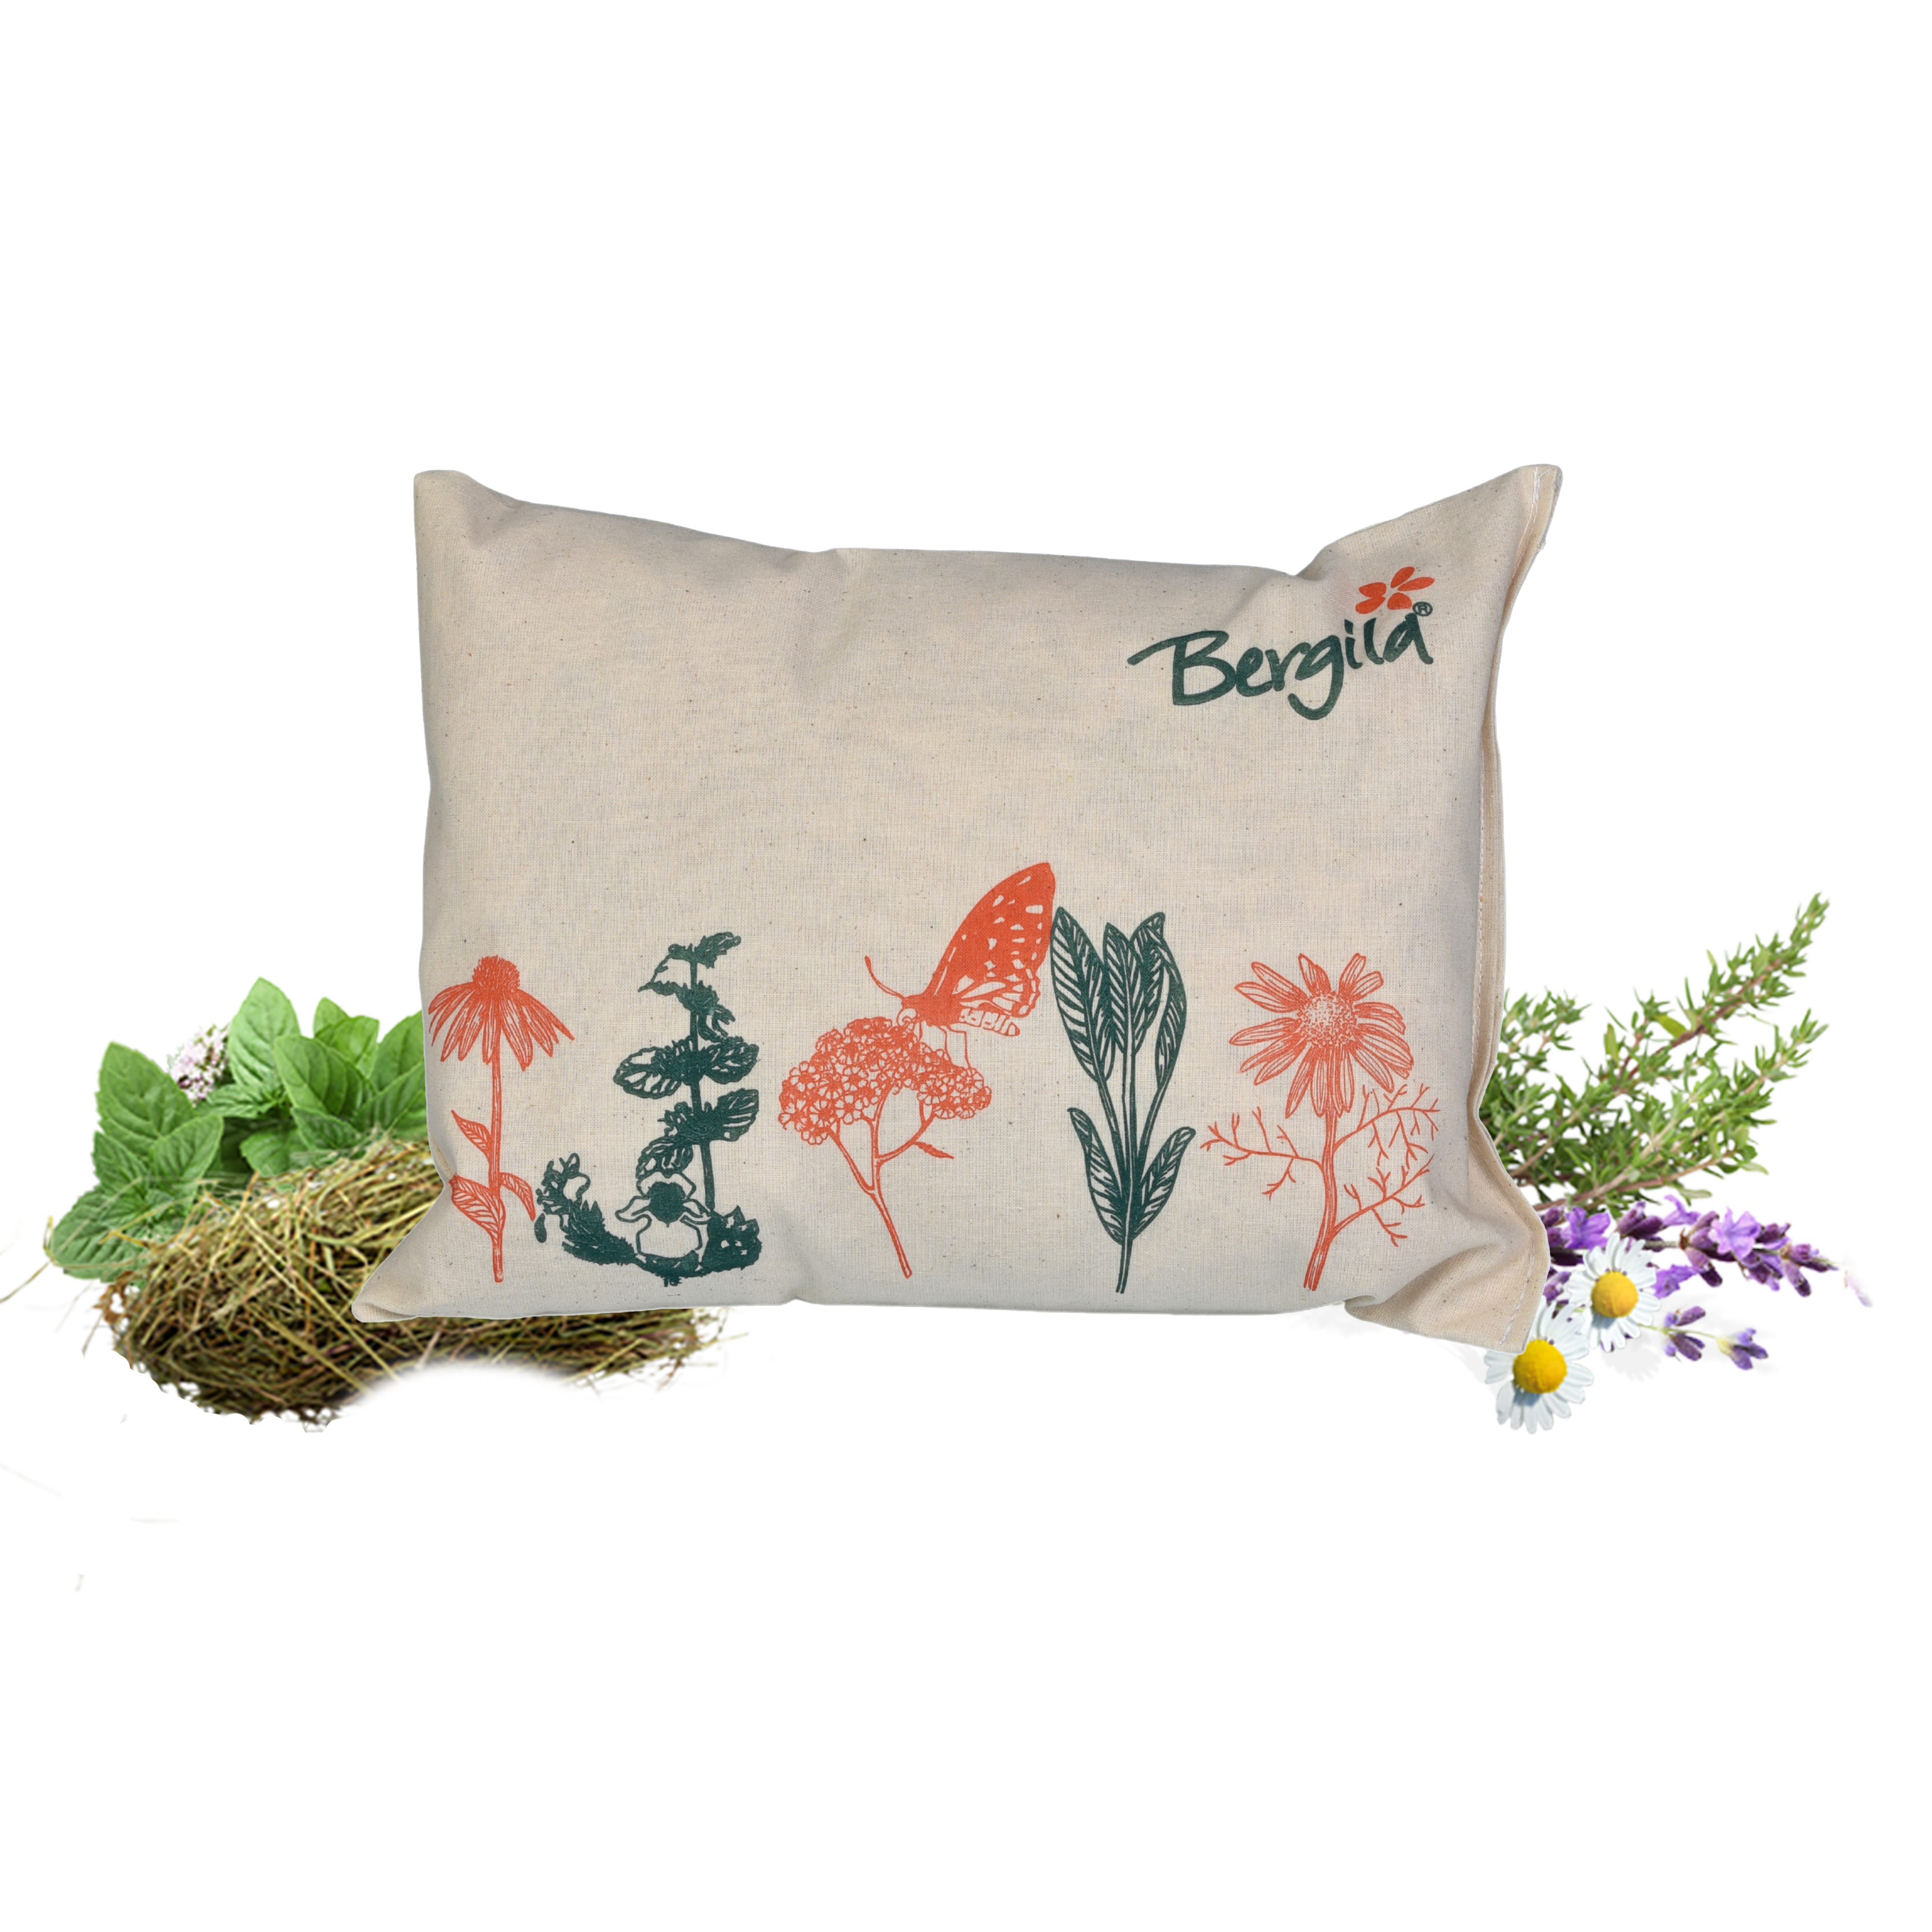 Herbal pillow with alpine hay flowers organic